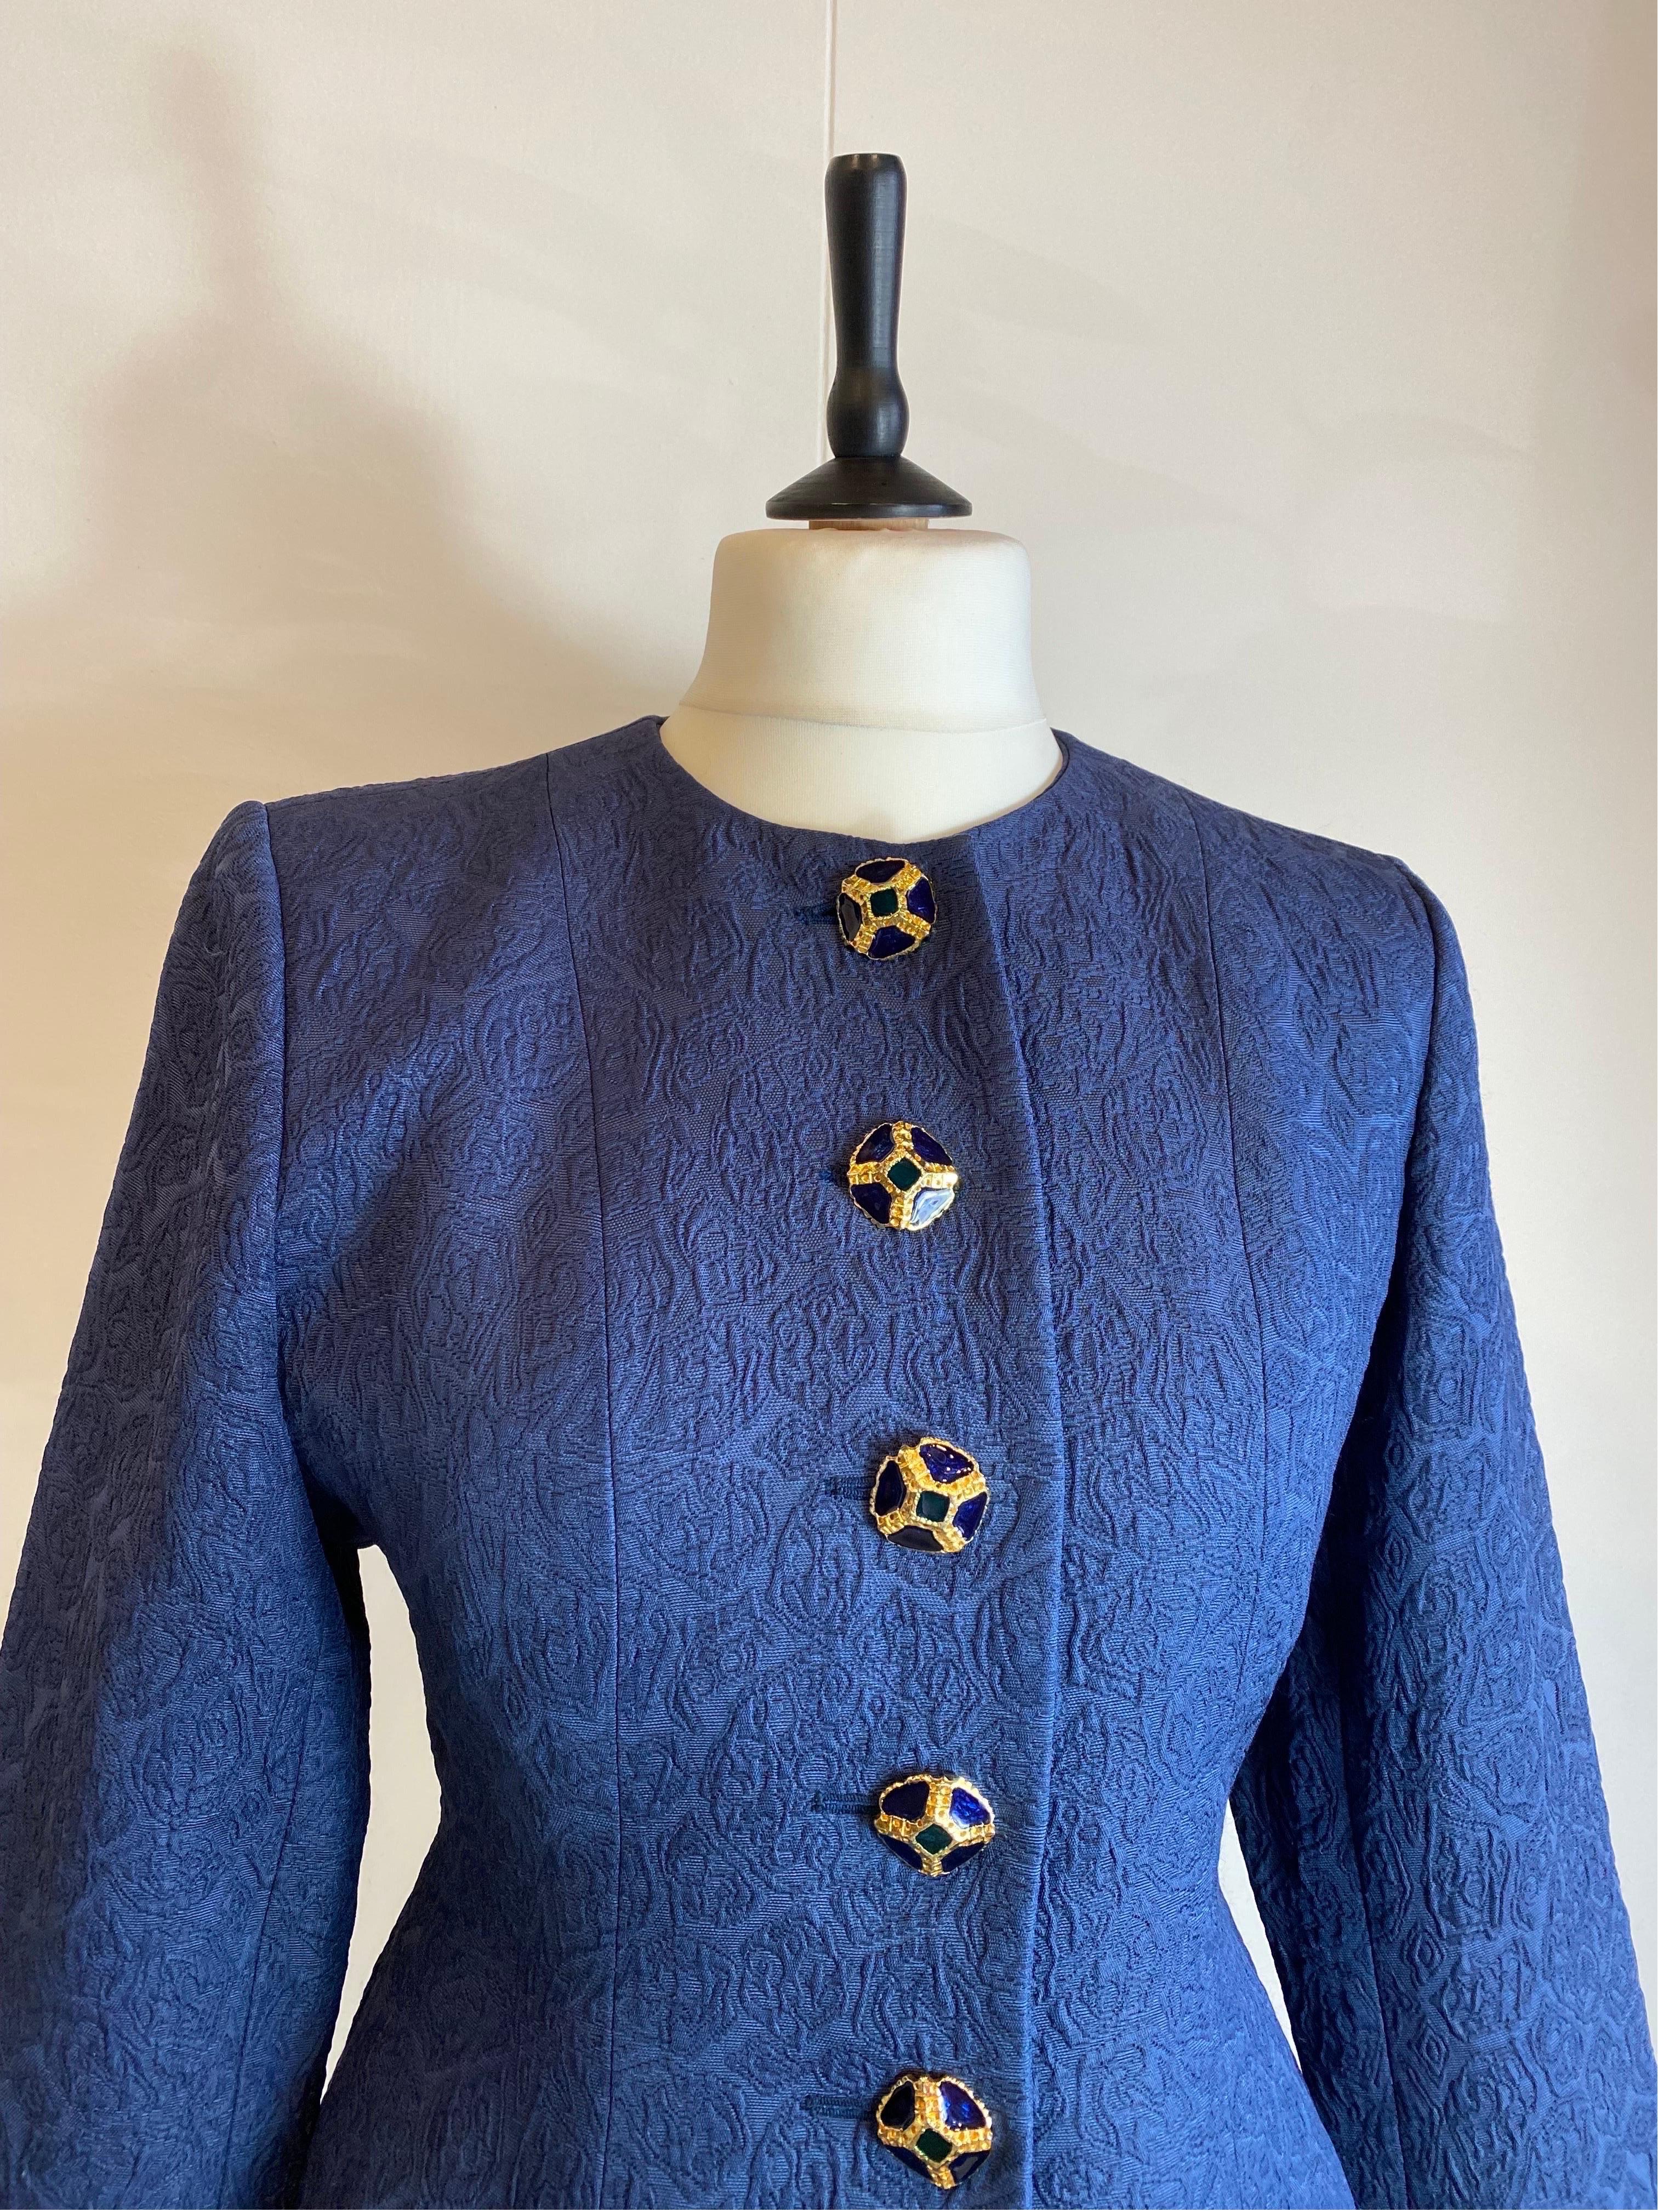 Yves Saint Laurent 80s vintage Blue Jacket In Excellent Condition For Sale In Carnate, IT